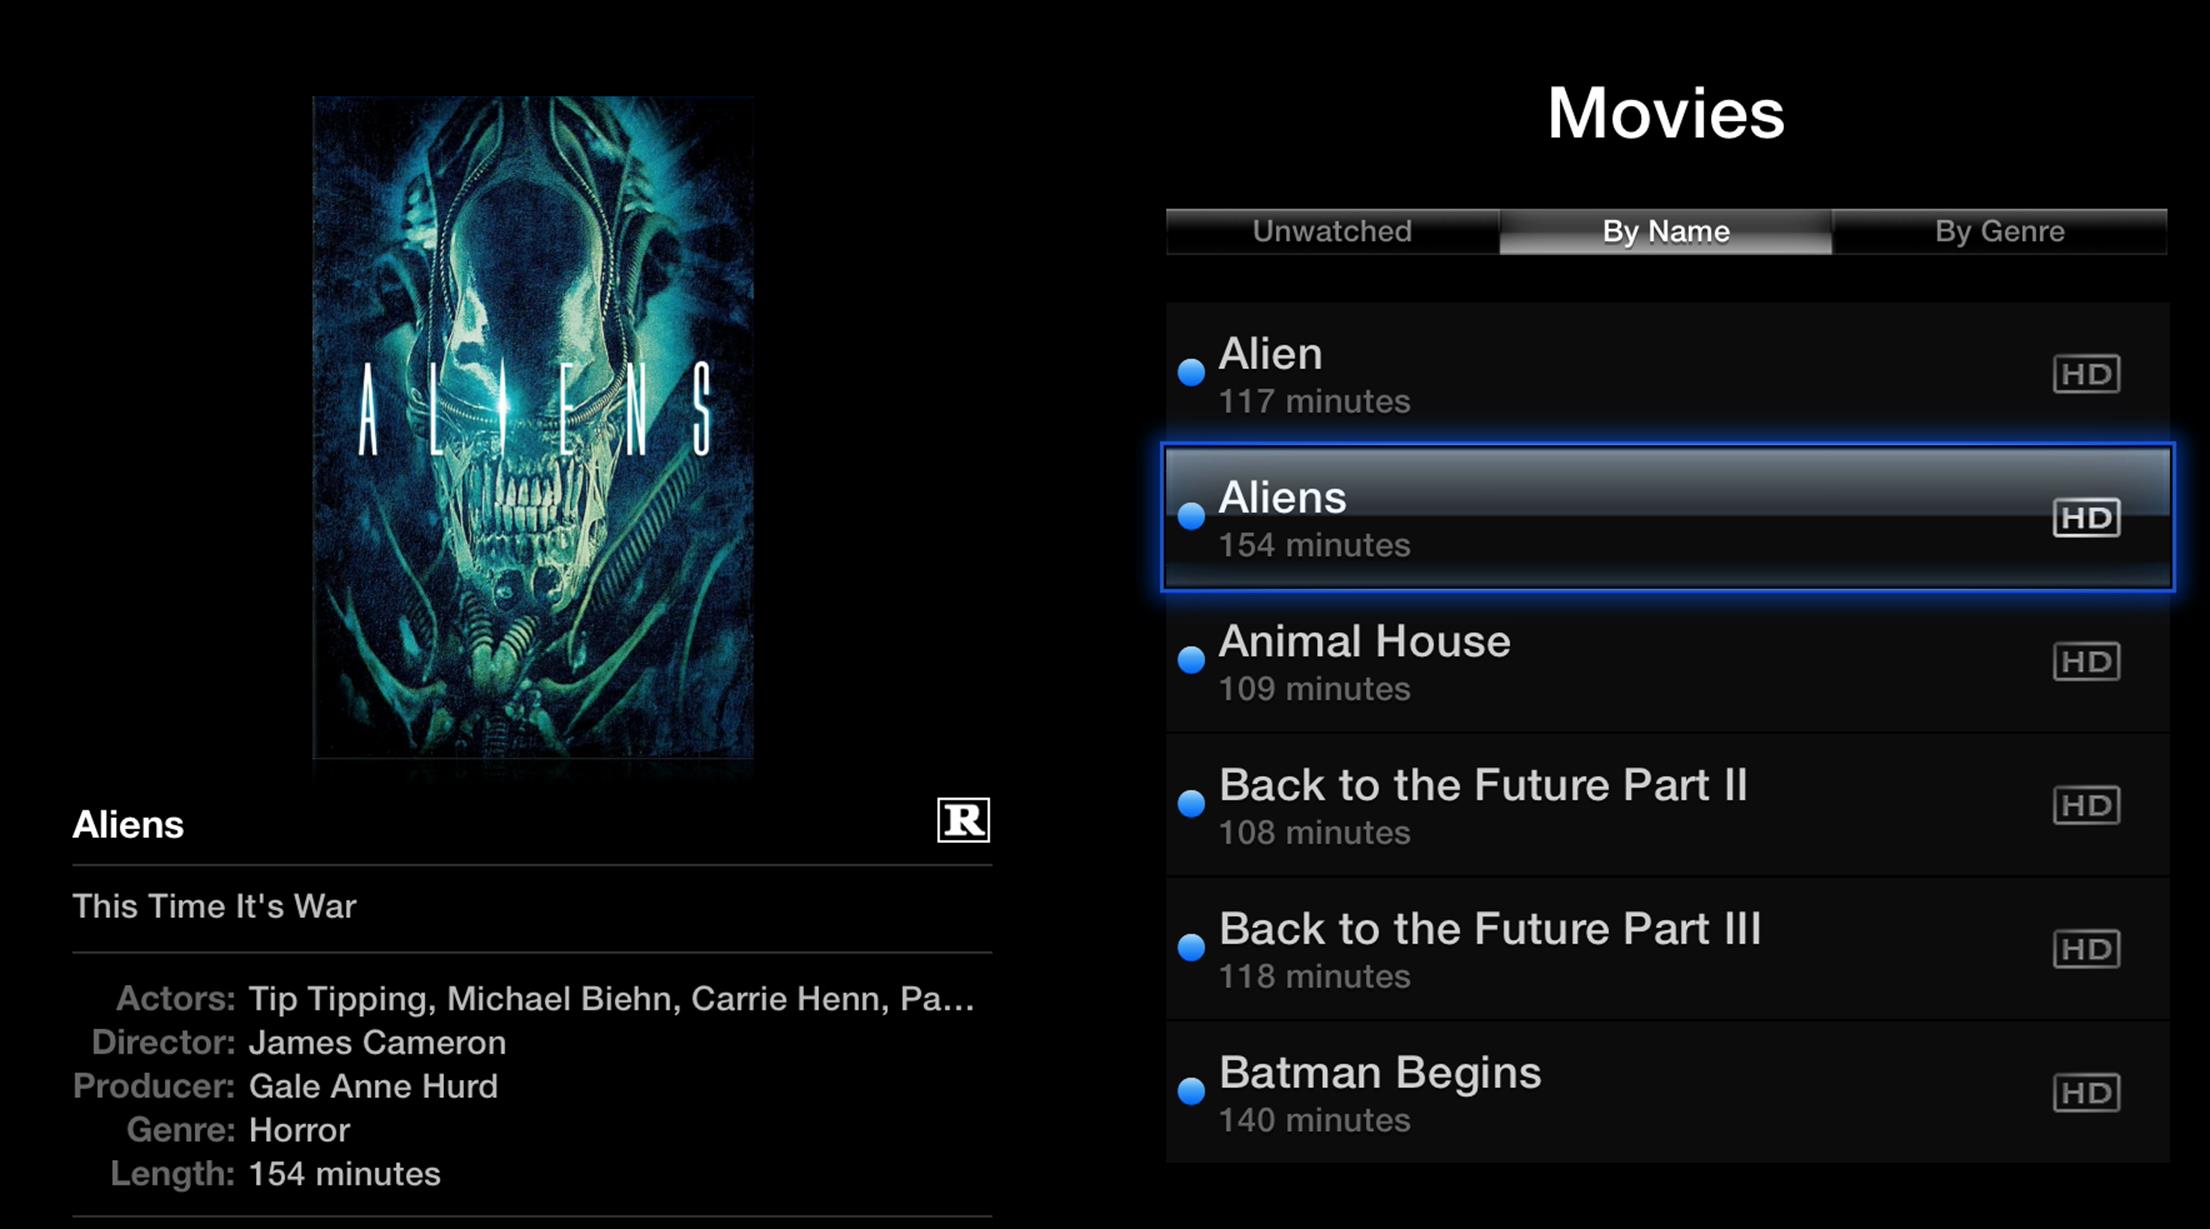 **Figure 39:** You can access all the movies in your iTunes library from the Apple TV, and sort them by name or genre, or by what you haven’t watched yet.